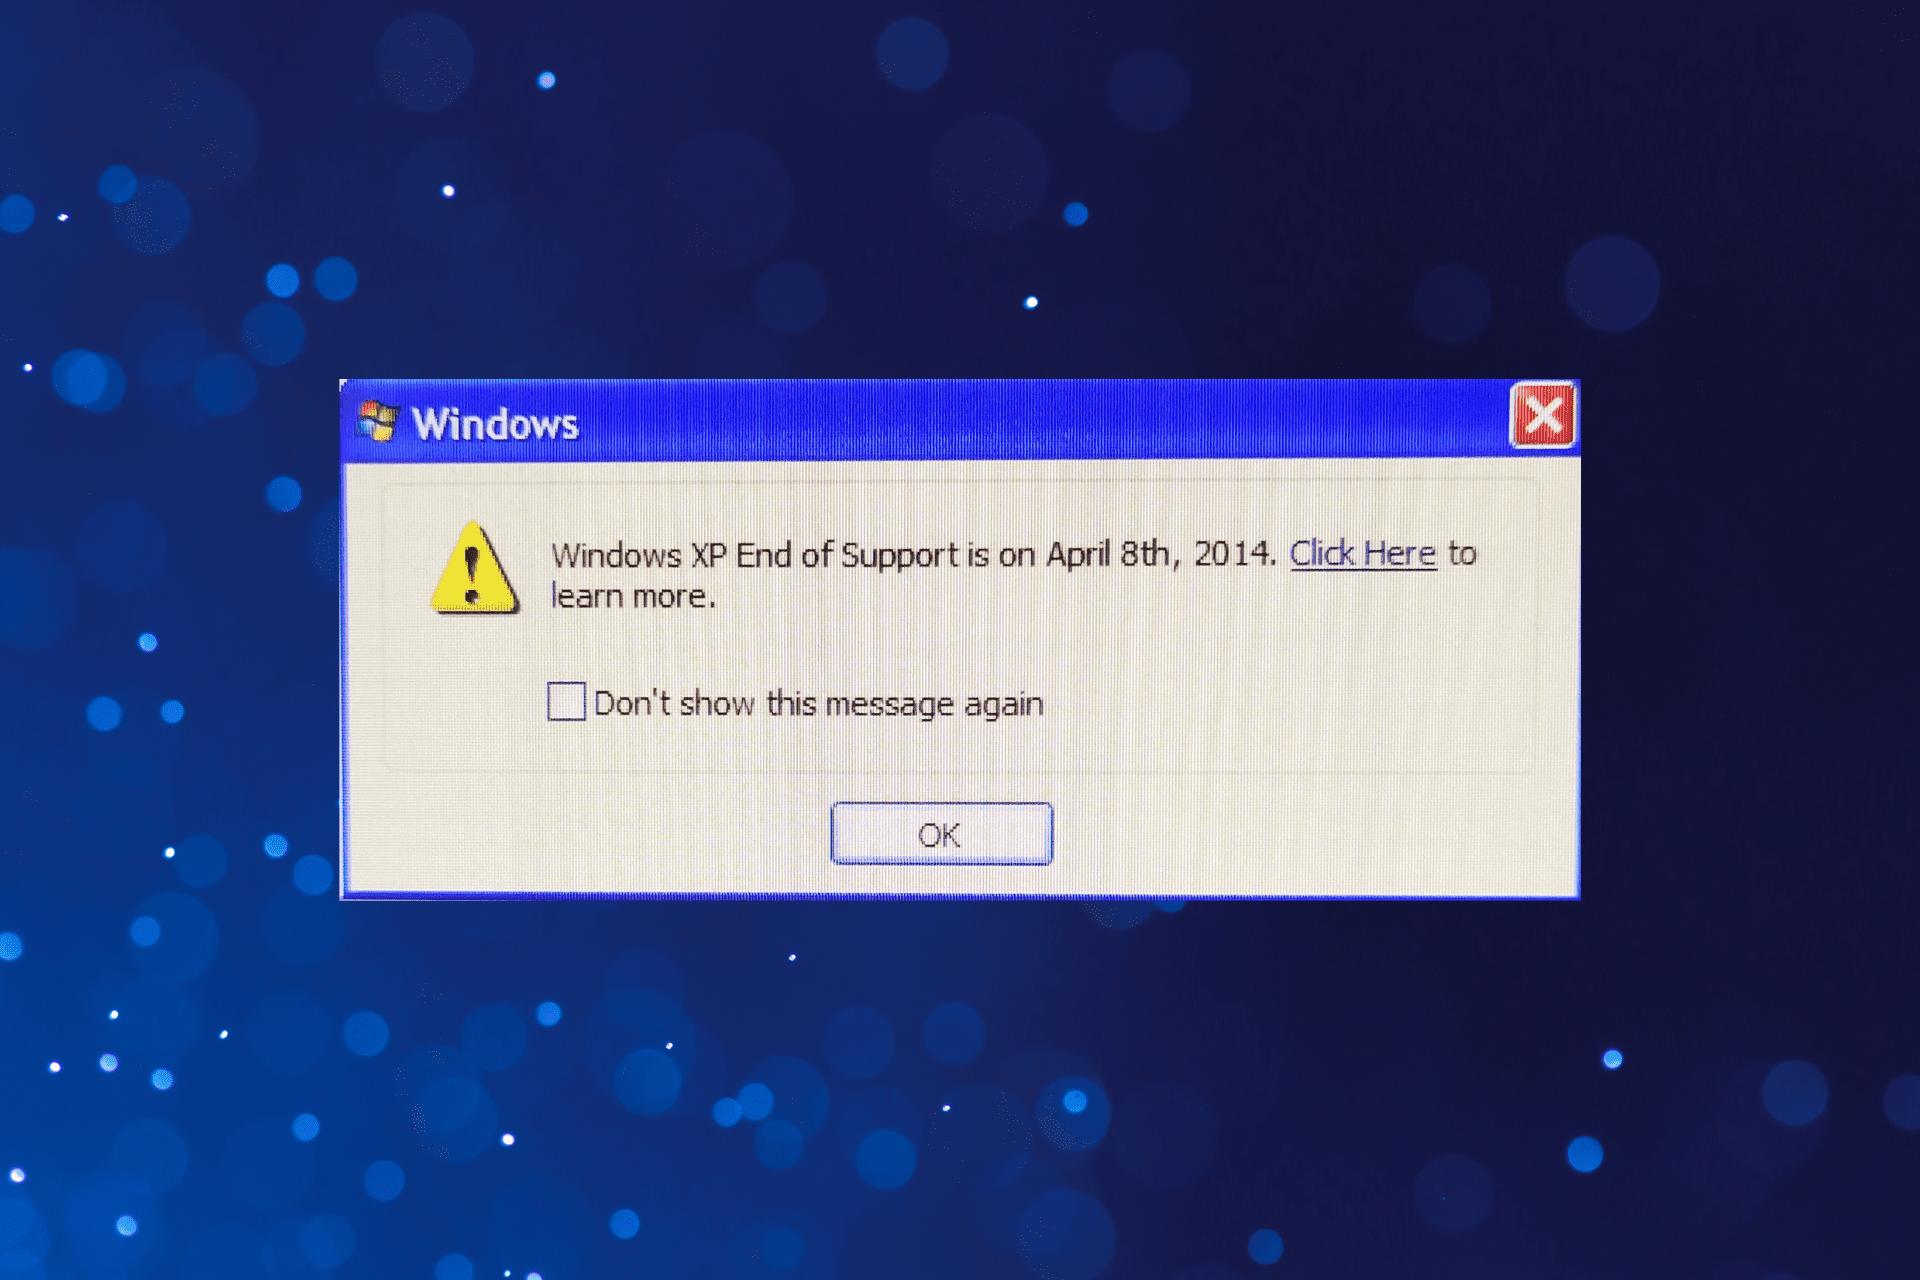 Windows XP End Of Support reminder